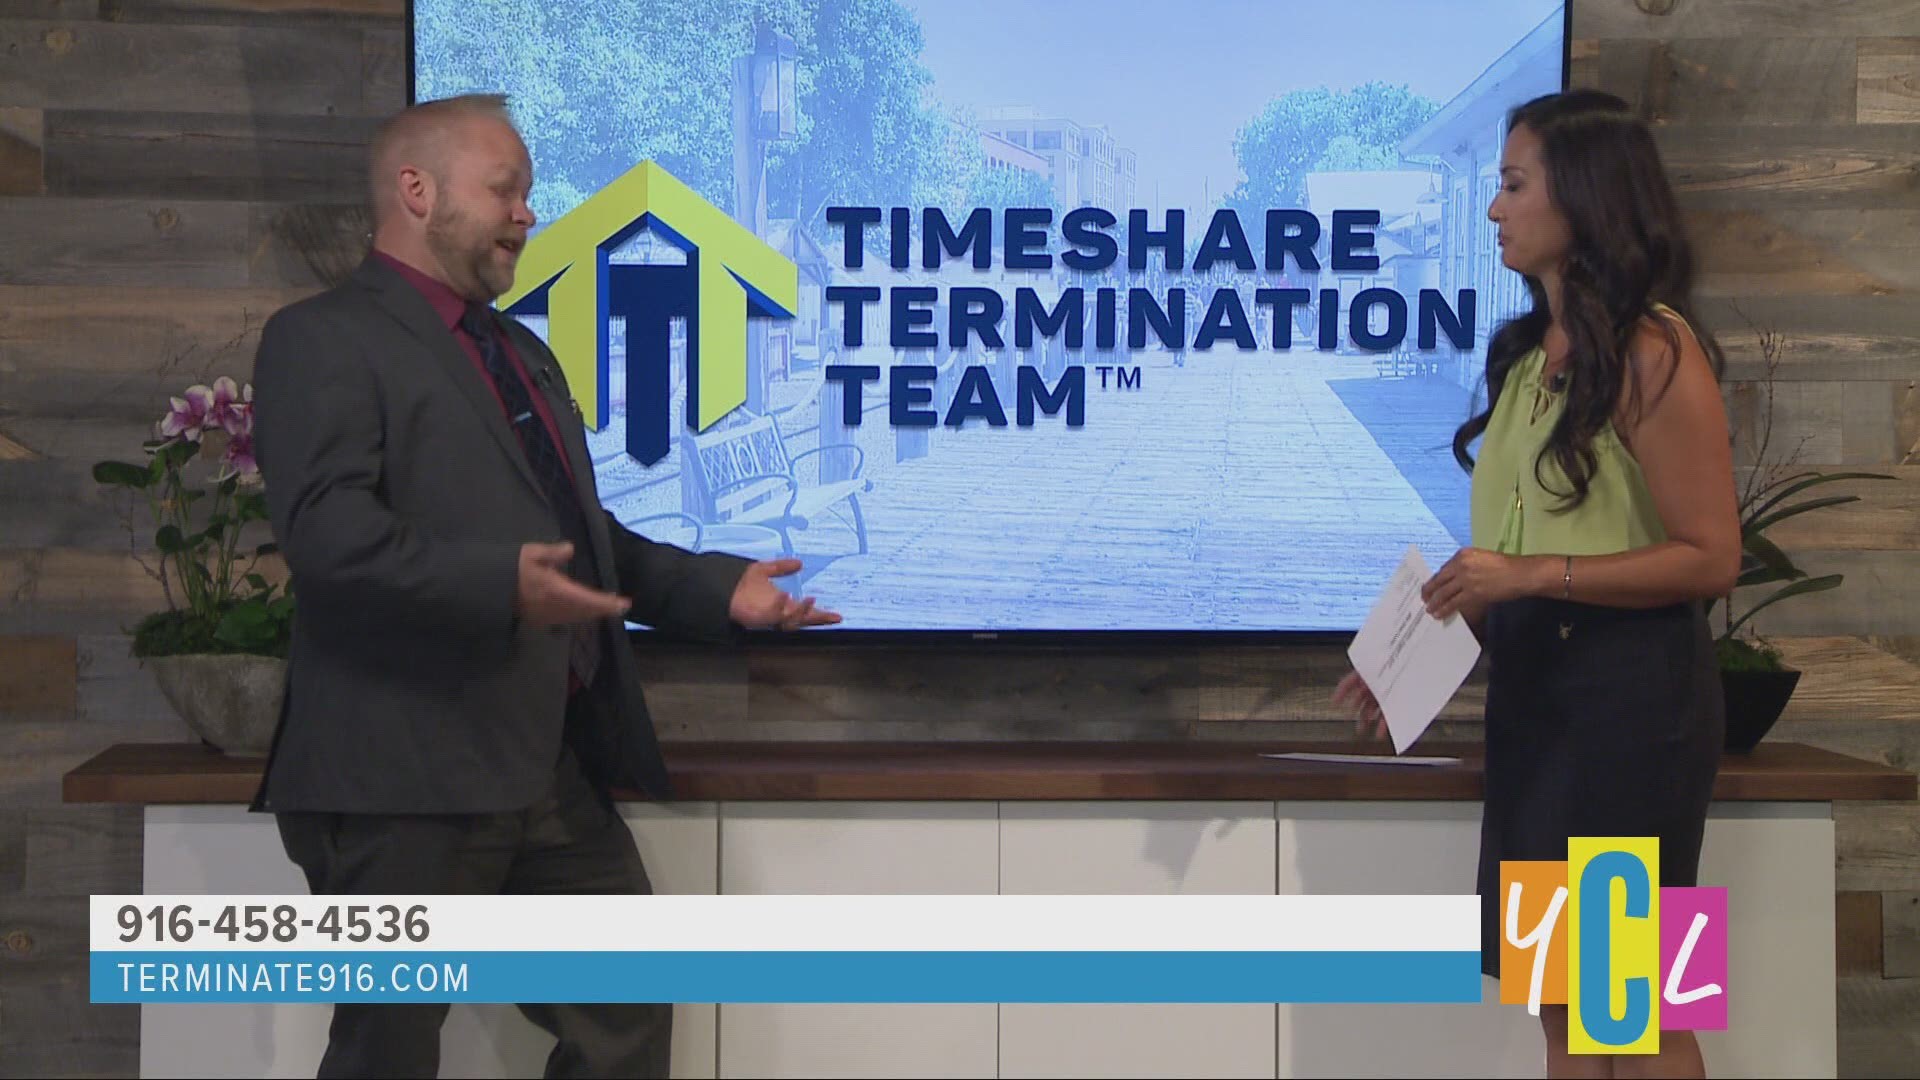 Timeshare Termination Team can help you. The following is a paid segment sponsored by Timeshare Termination Team.